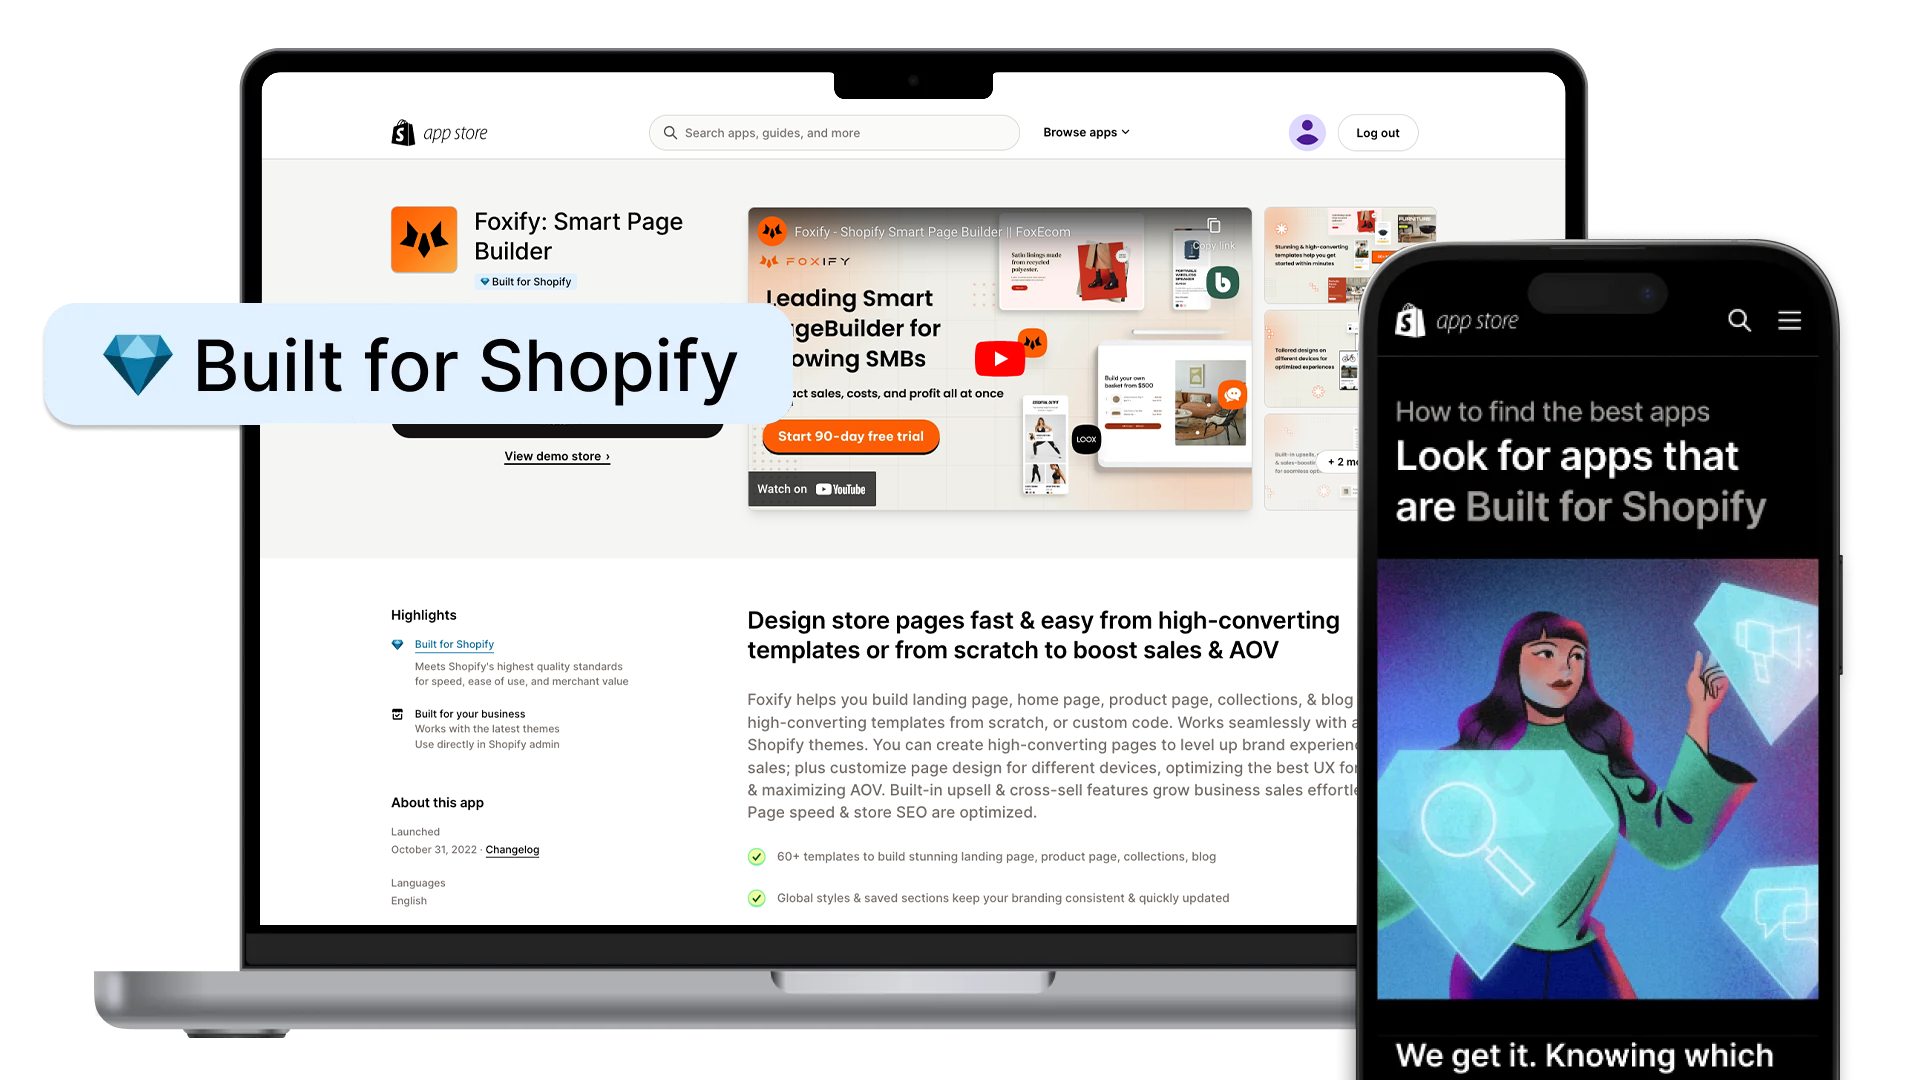 foxify smart page builder, built for shopify